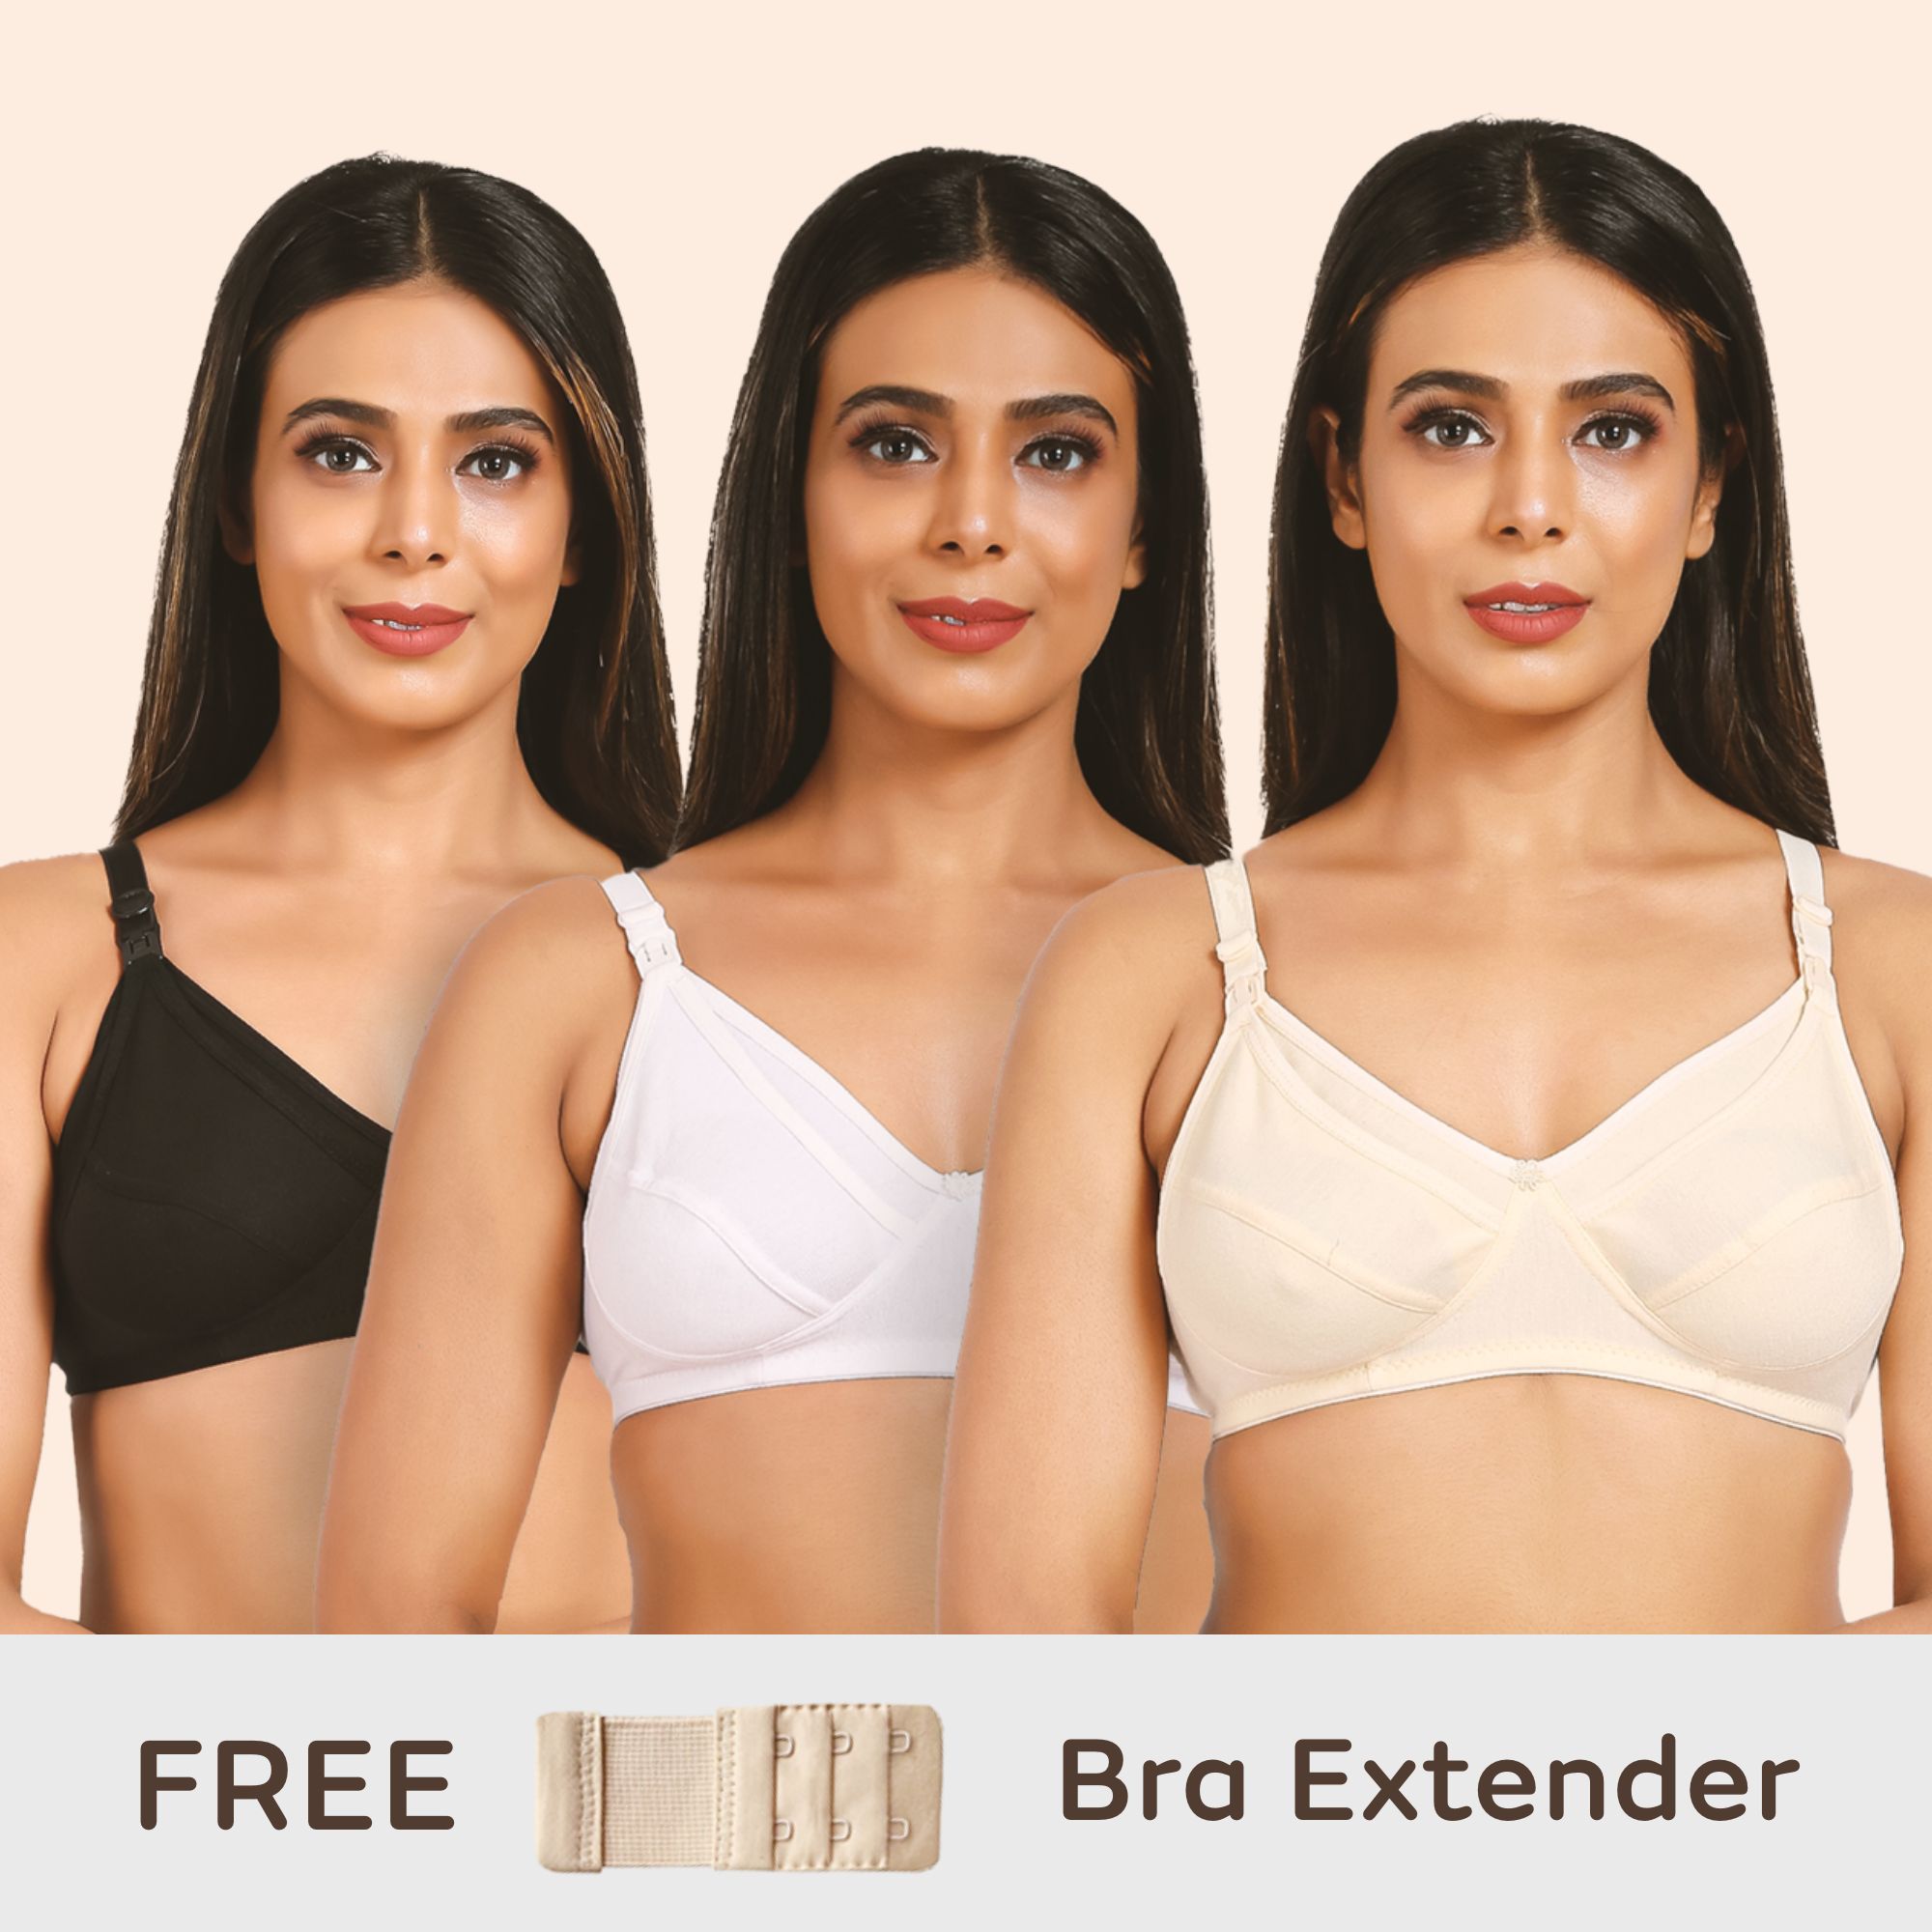 Maternity/Nursing Bras Non-Wired, Non-Padded - Pack of 3 with free Bra Extender (Classic Black, Classic White, Magnolia Cream) 34 B